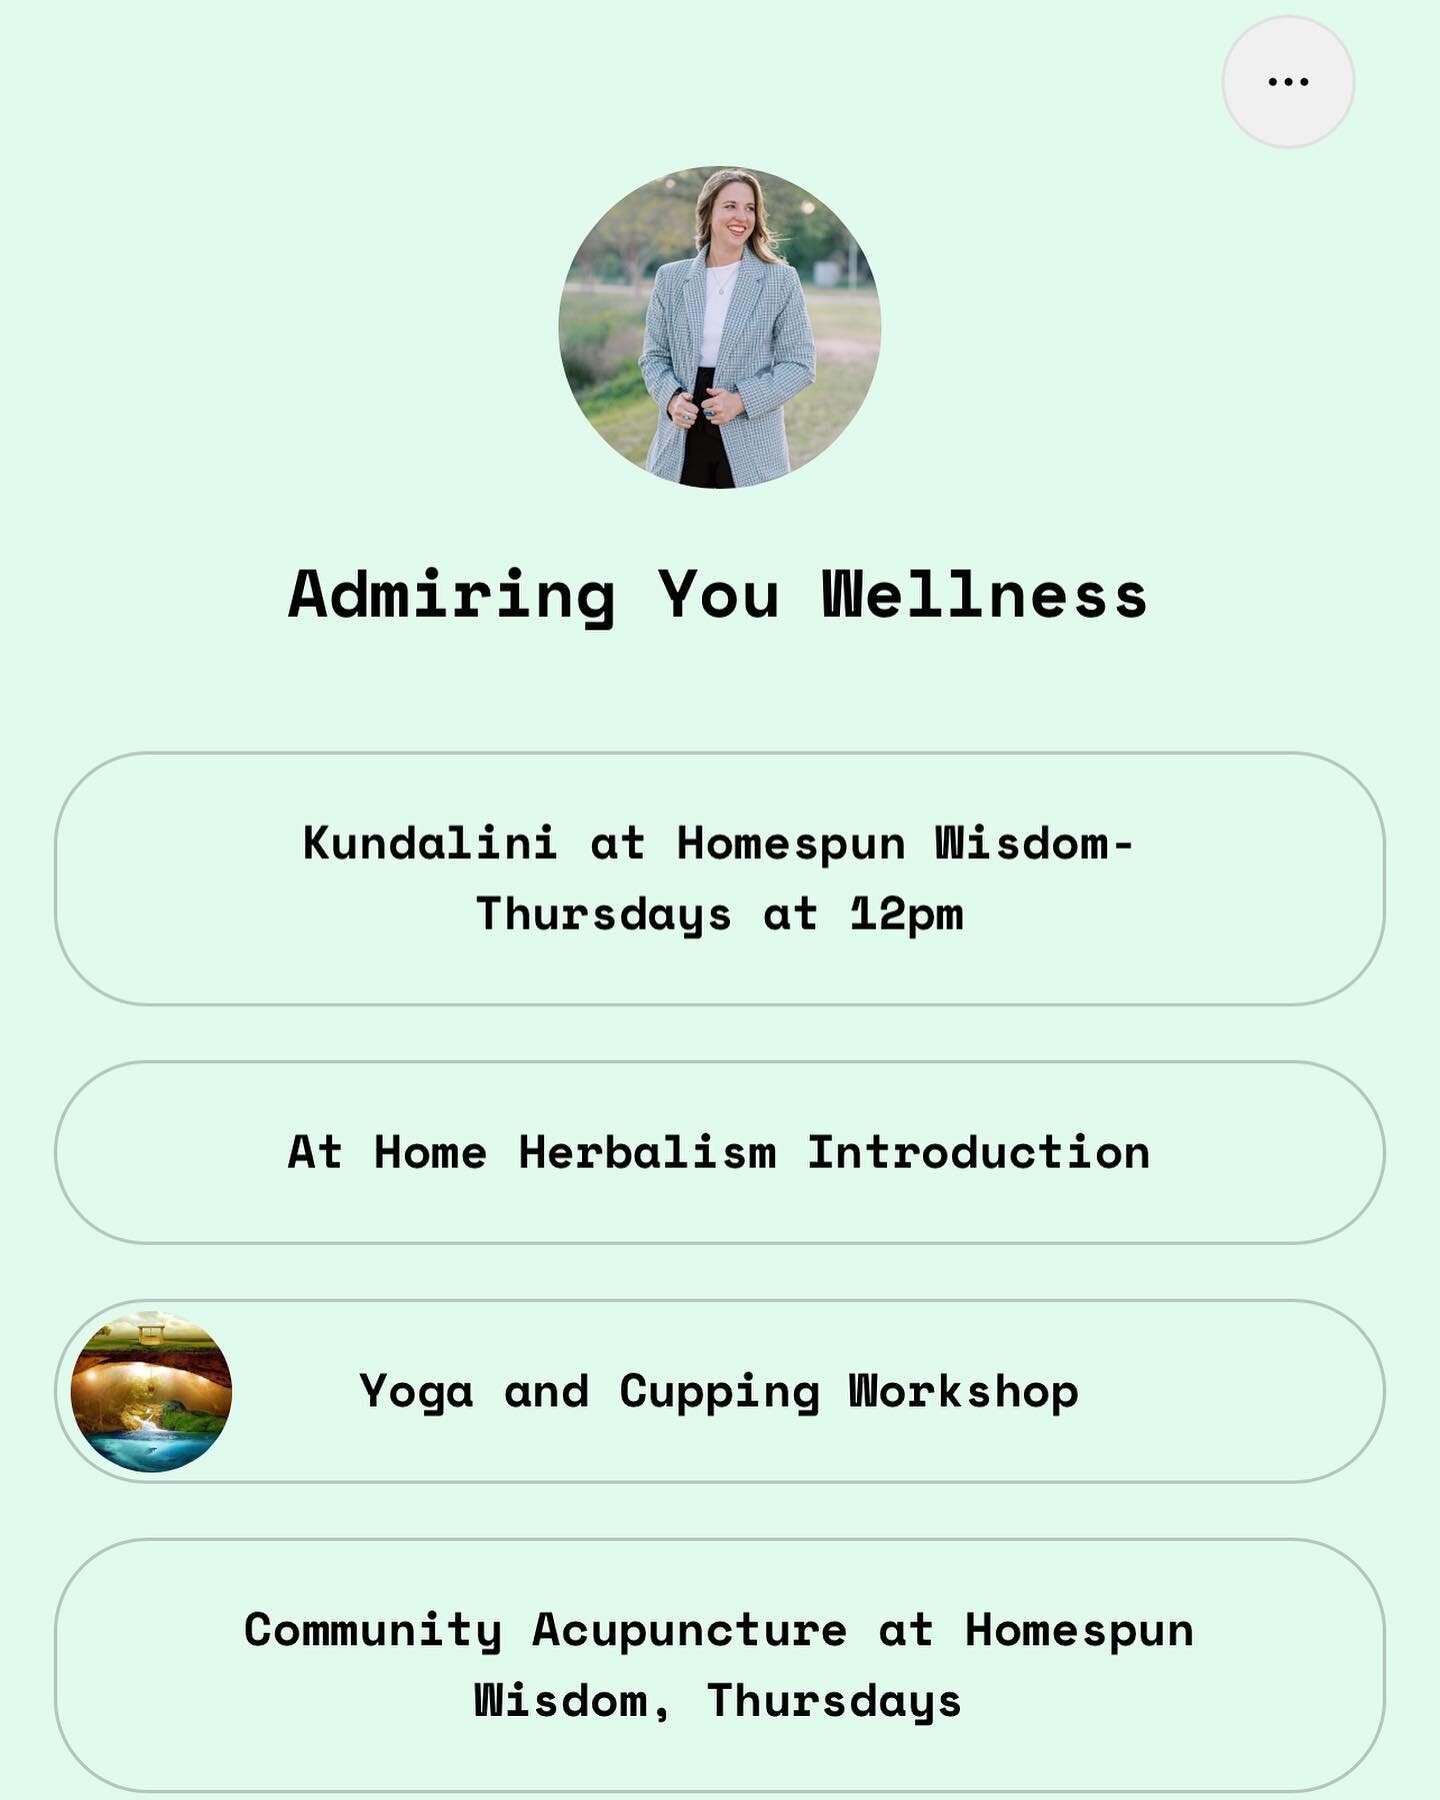 Upcoming events and a couple of schedule changes 😍

Community acupuncture and kundalini Thursdays will be moving to @homespunwisdomtx starting June 22nd! With Thrive yoga closed (sad) I&rsquo;m so glad to have found another home for these offerings.